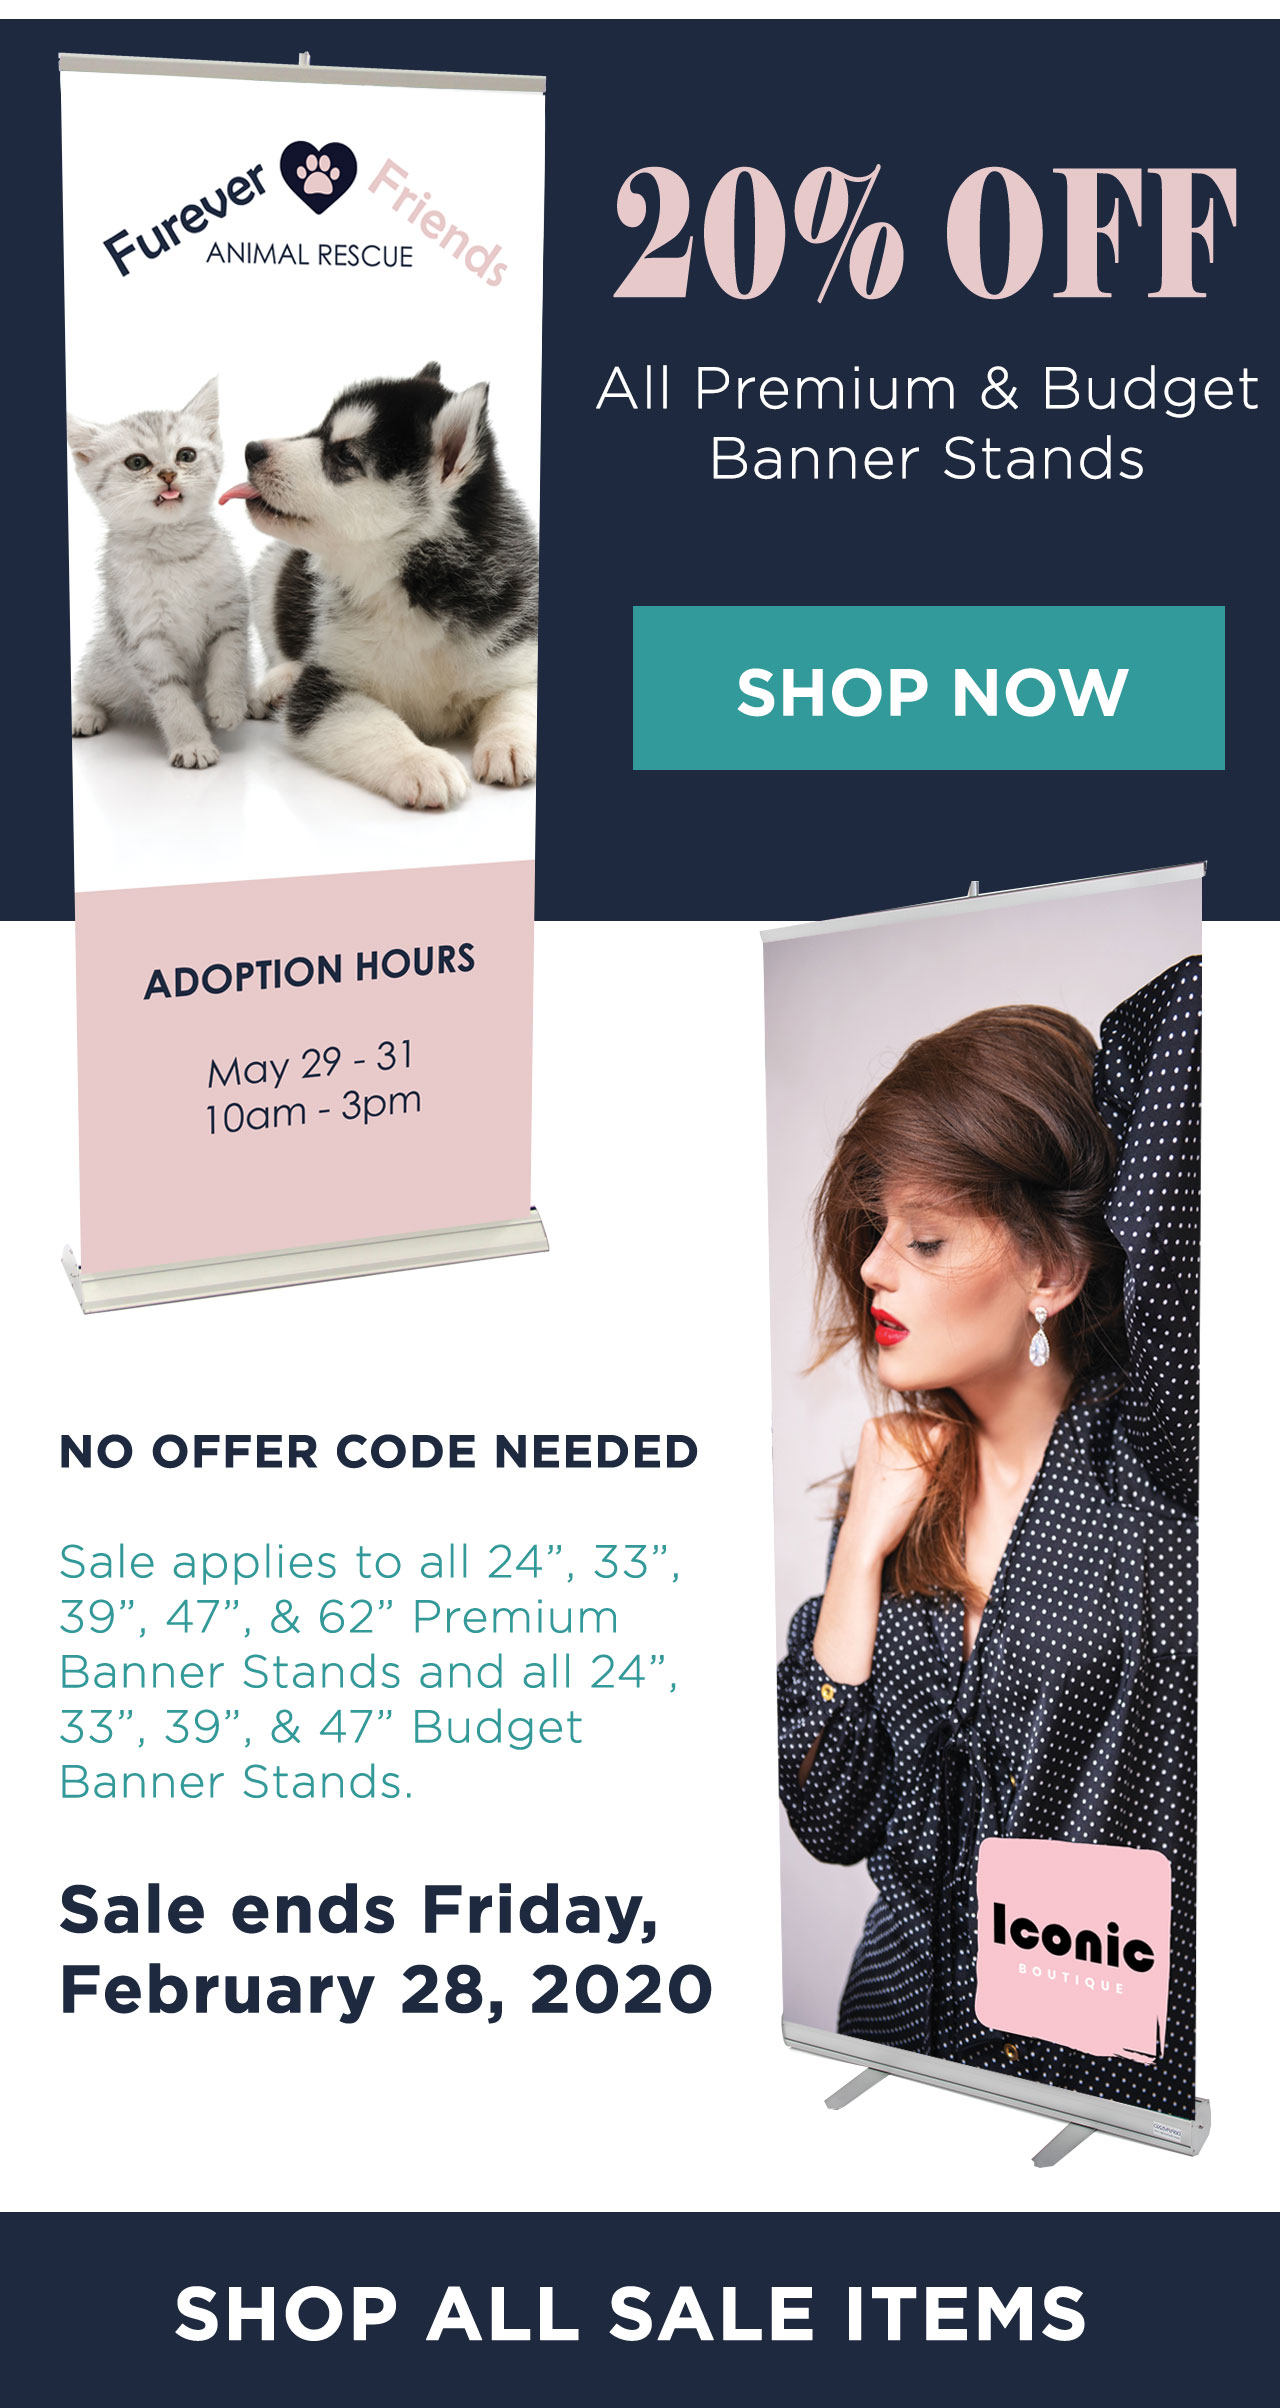 20% OFF All Premium and Budget Banner Stands - Sale ends Friday, February 28, 2020